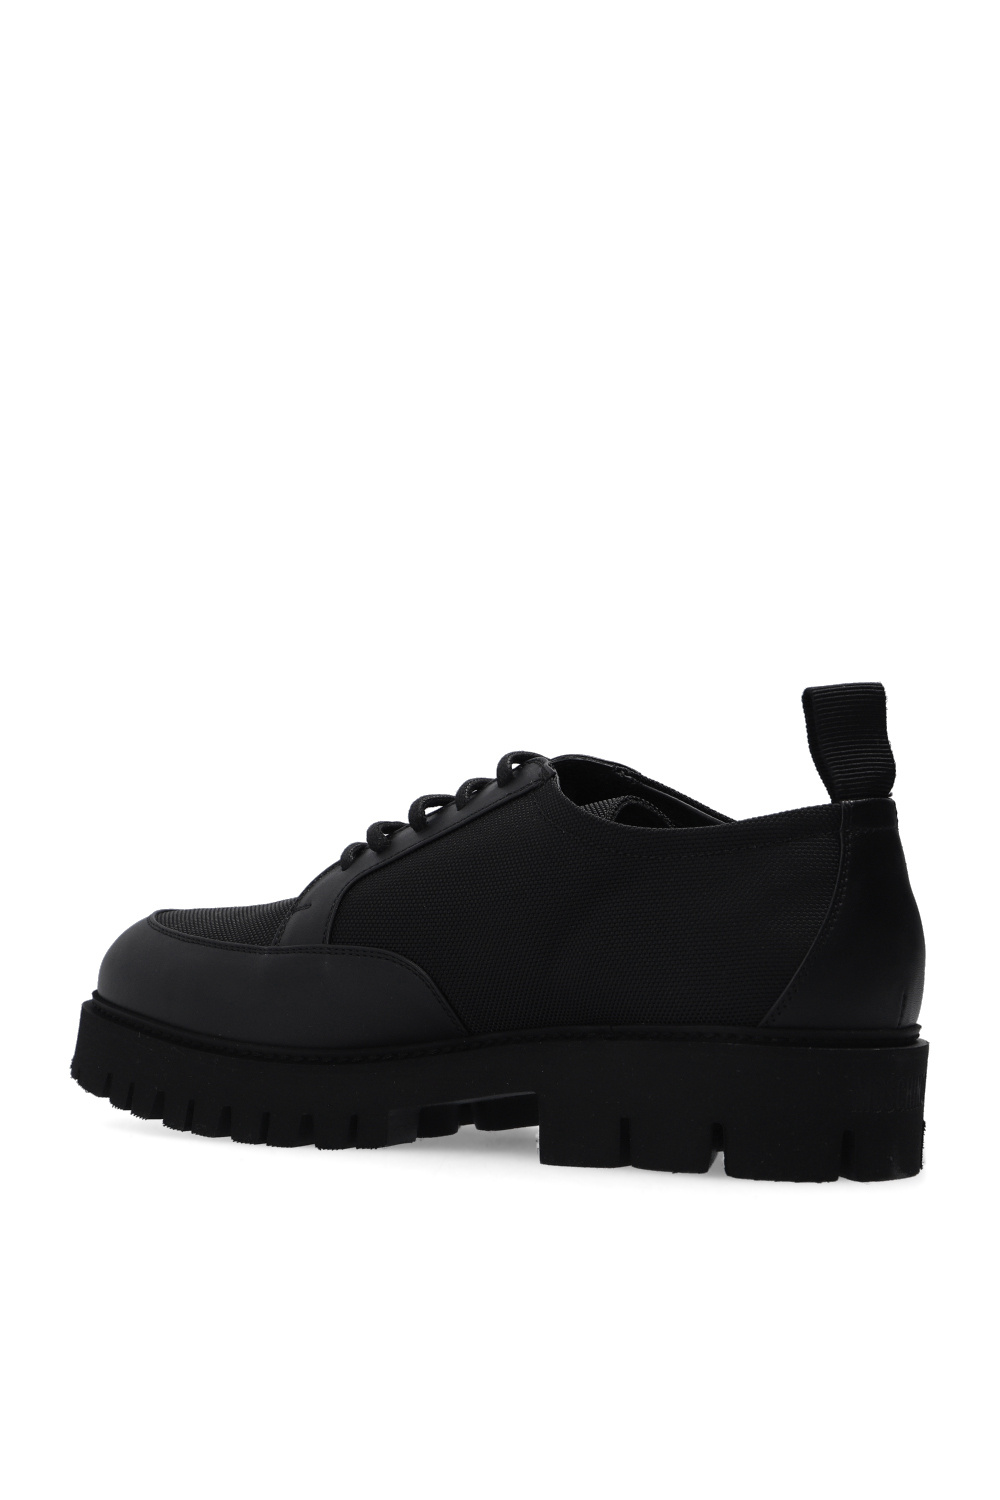 Moschino paraboot matte leather derby shoes cloudflyer item